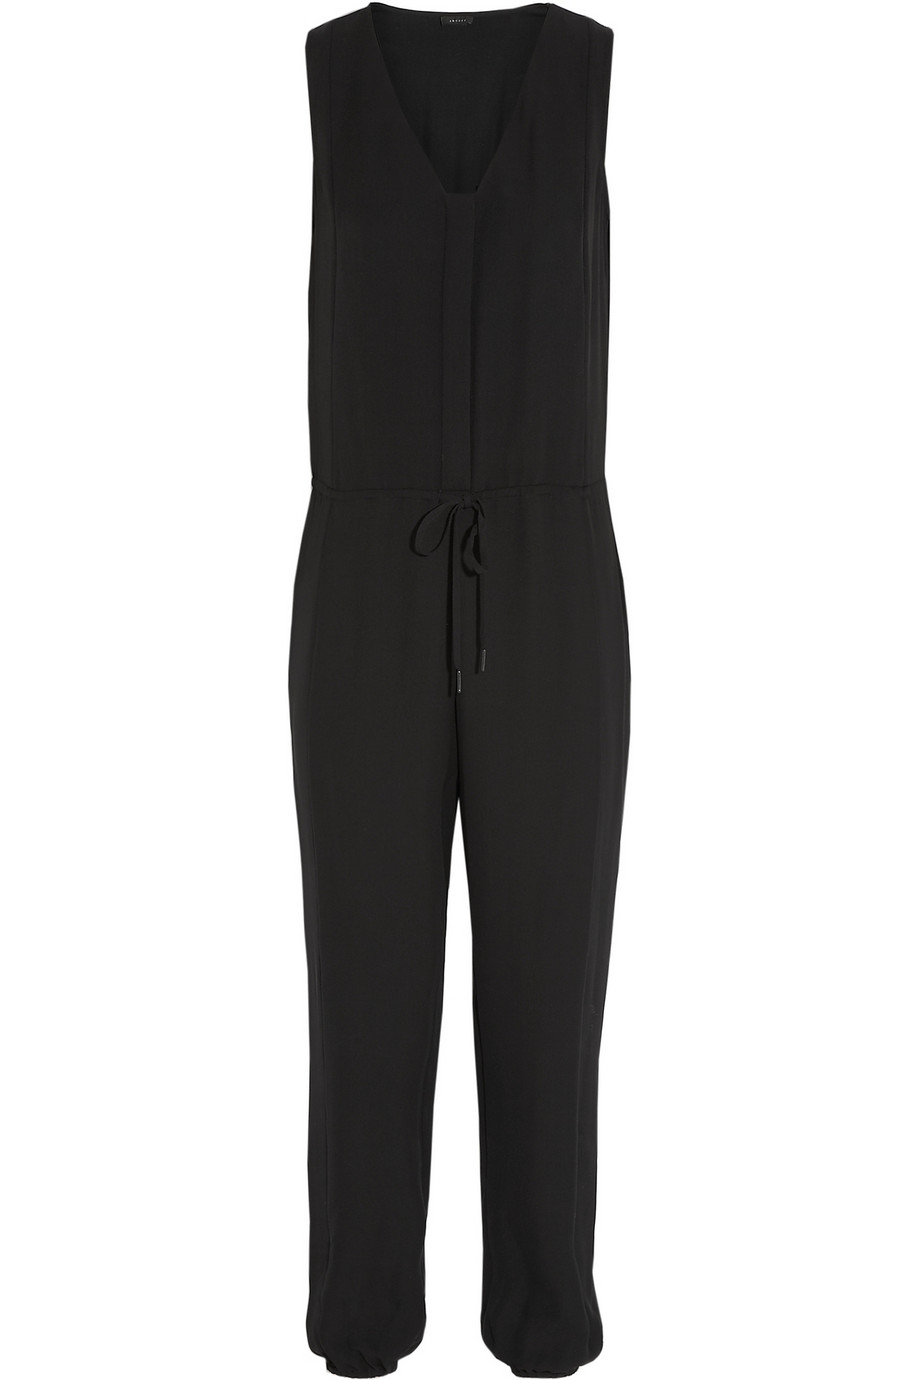 Theory Silk-Crepe Jumpsuit in Black | Lyst